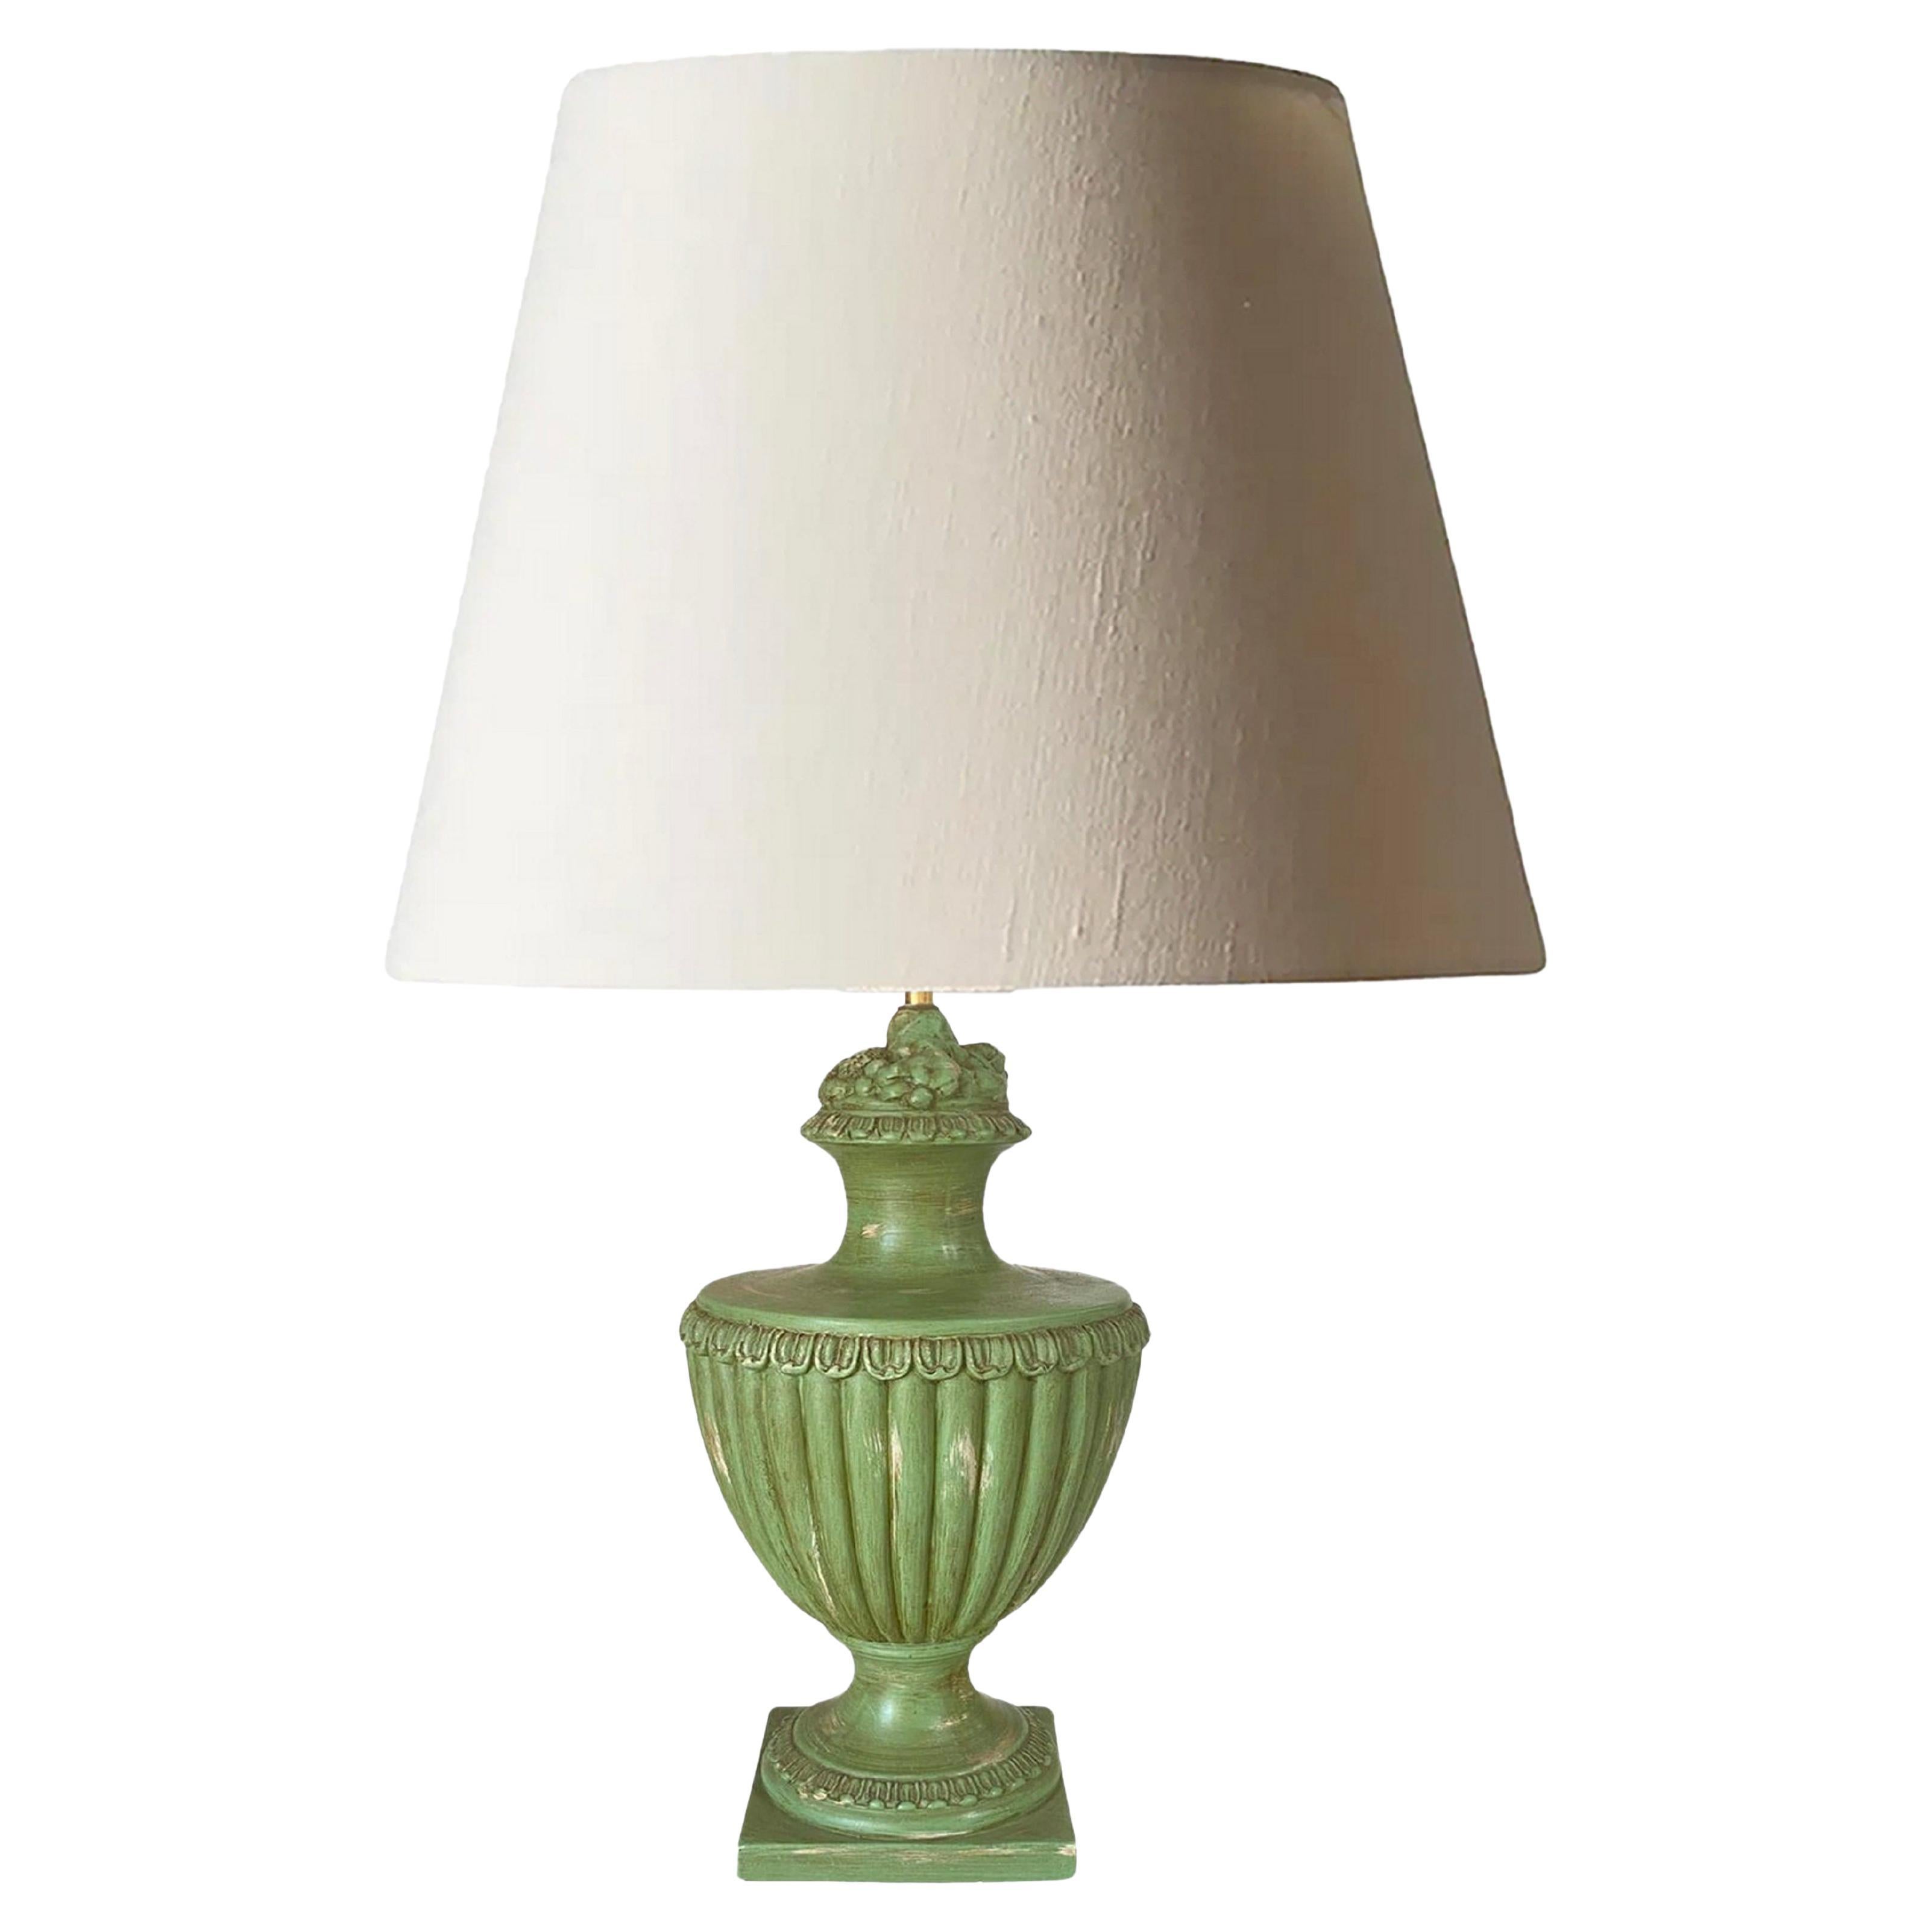 Table Lamp in old patinated Ceramic Green color France 1970 Signed Lancel Paris For Sale